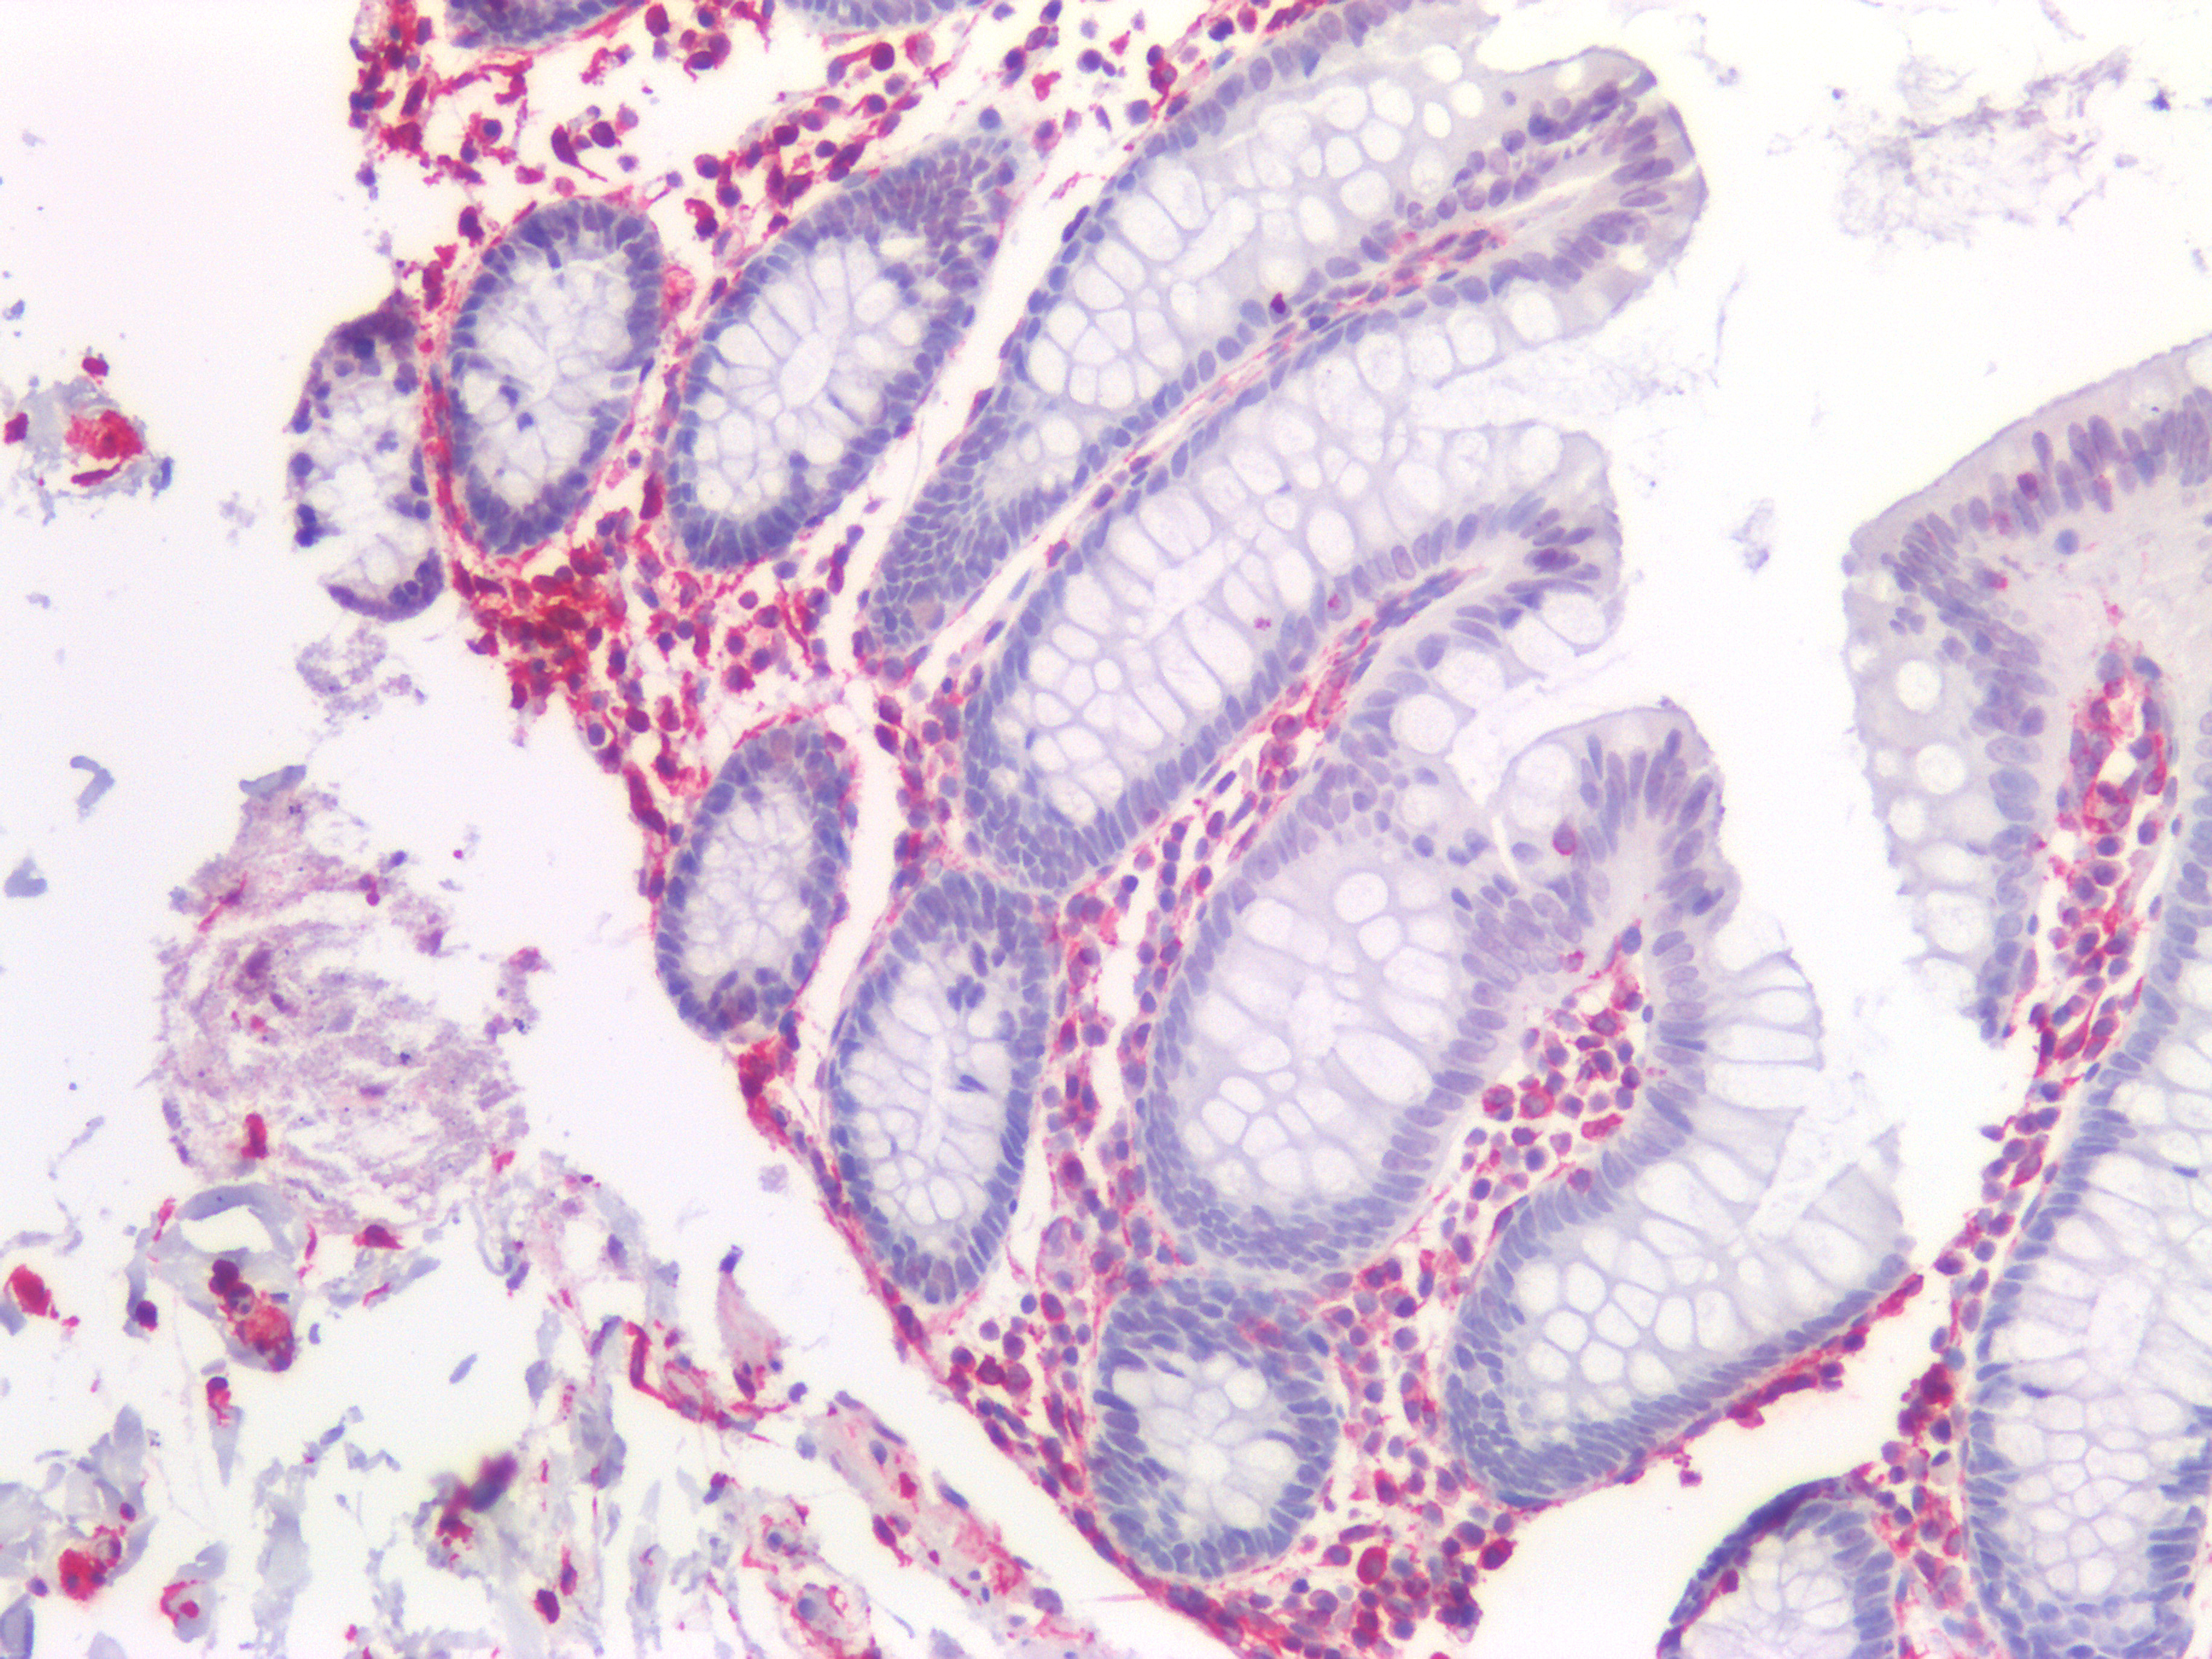 Figure 6. Immunostaining of human paraffin embedded tissue sections of human colon with MUB1903P (diluted 1:100), showing the specific pattern of vimentin in the mesenchymal cell types, such as fibroblasts in the connective tissue, and endothelial cells in blood vessels. As expected, no reactivity is seen in the epithelial cell compartment.